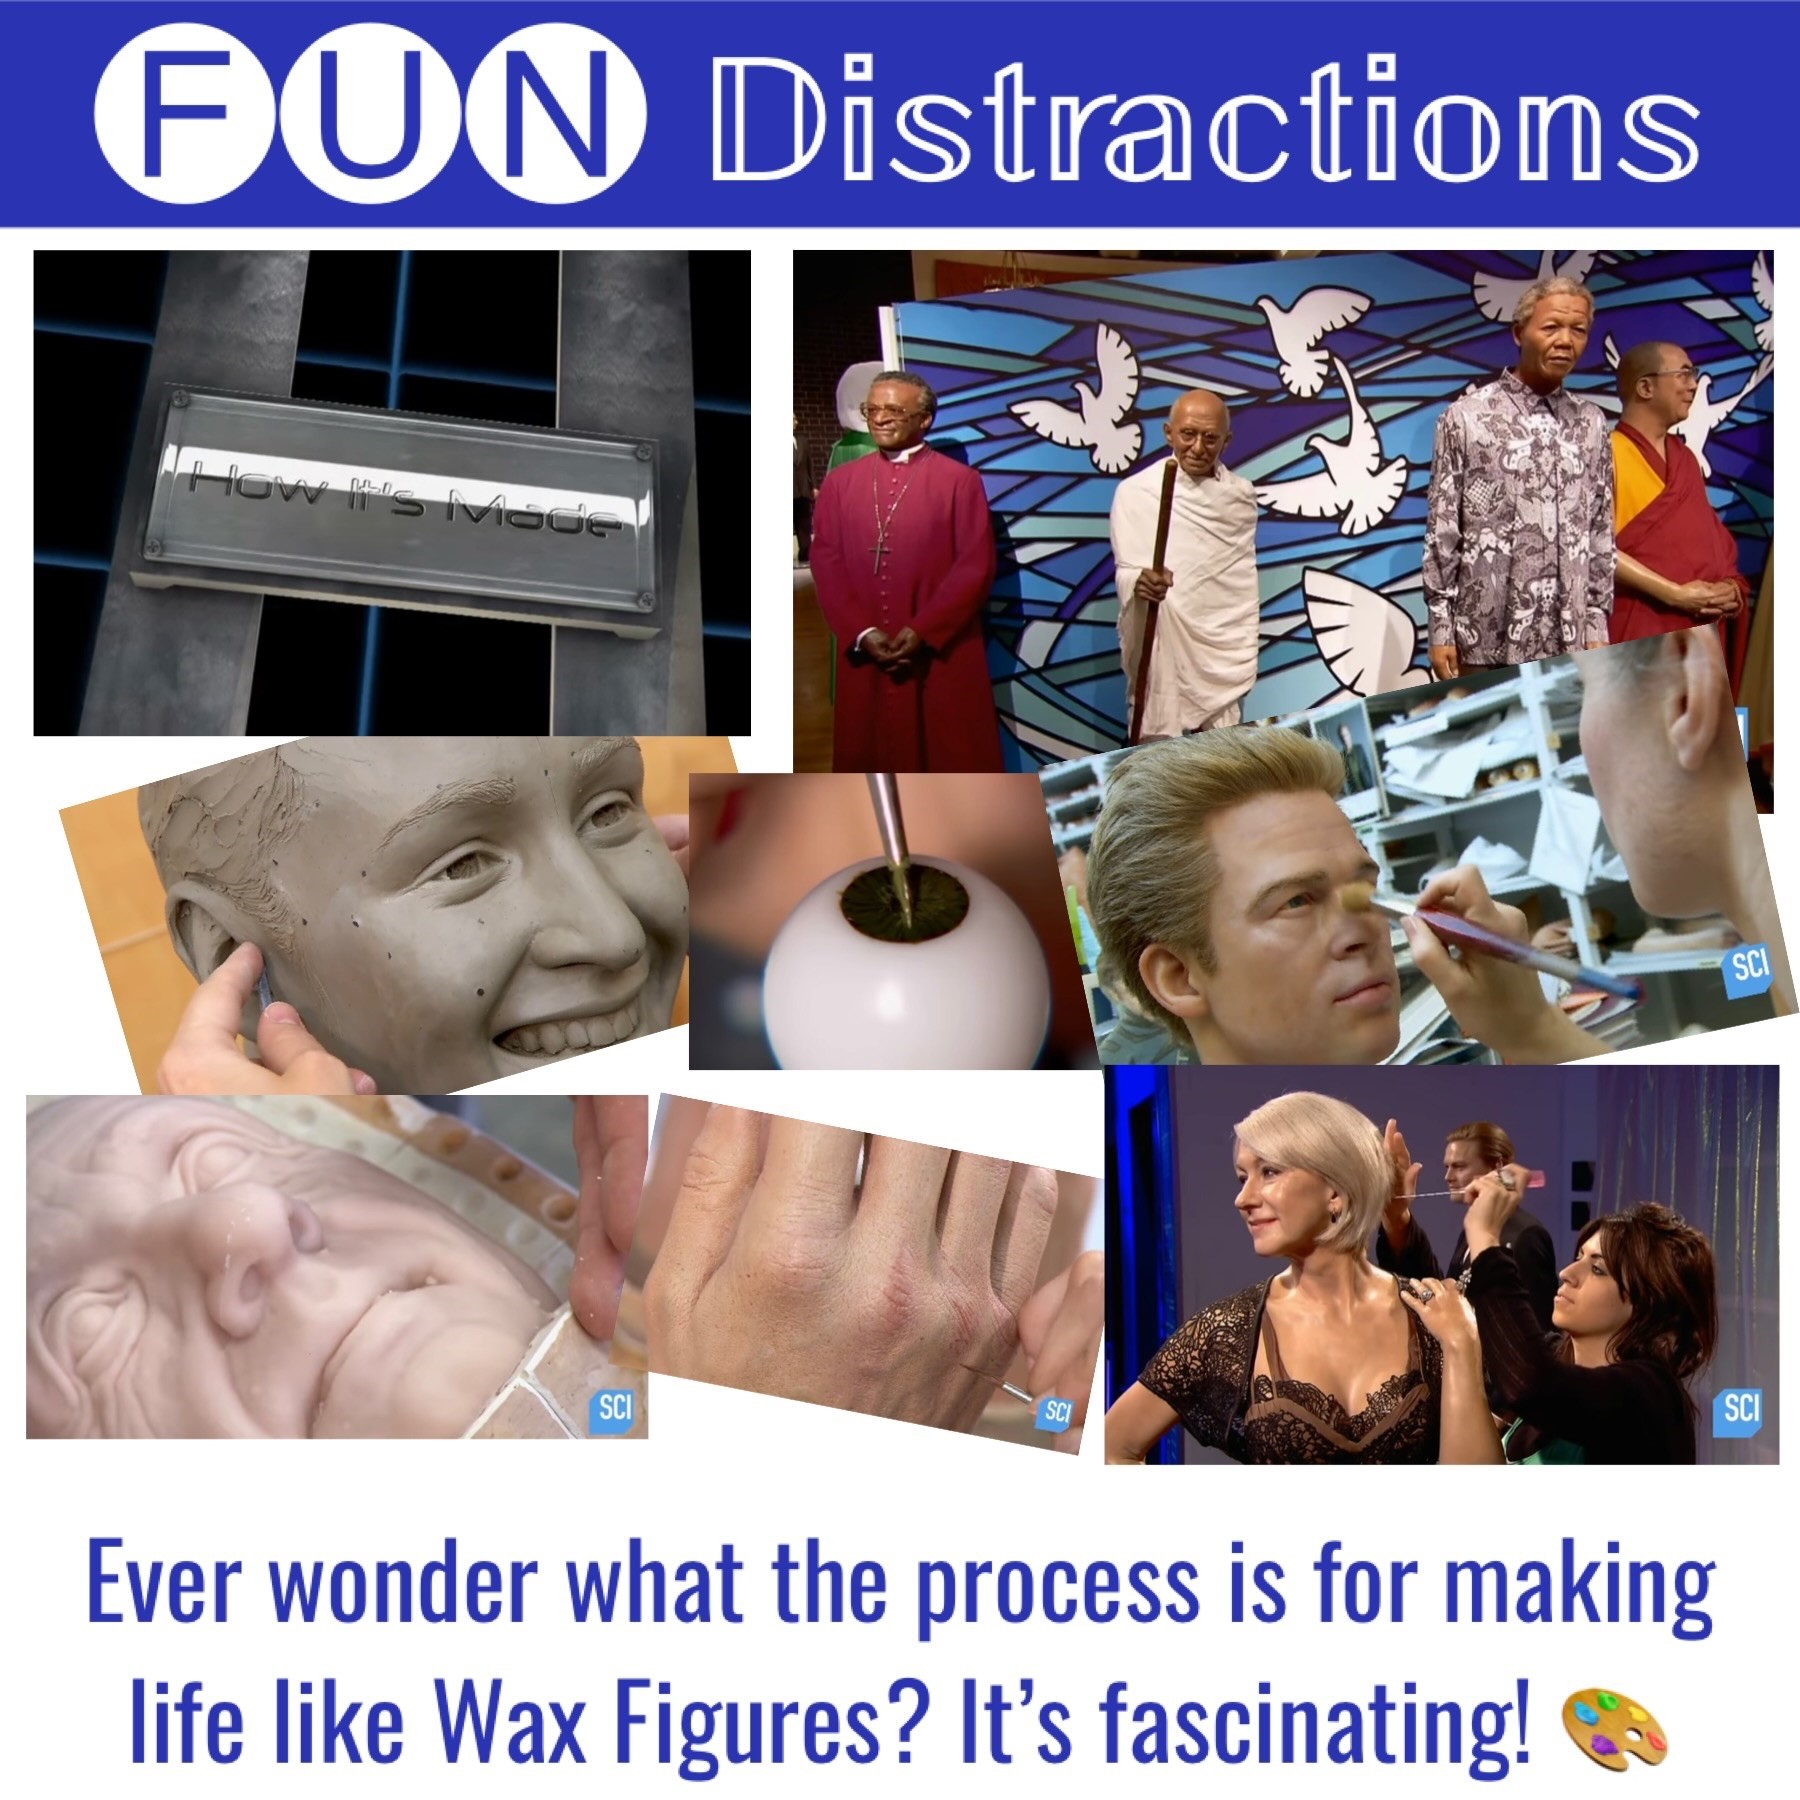 Image advertising the Library’s FUN Distraction series post about how life like wax figures are made